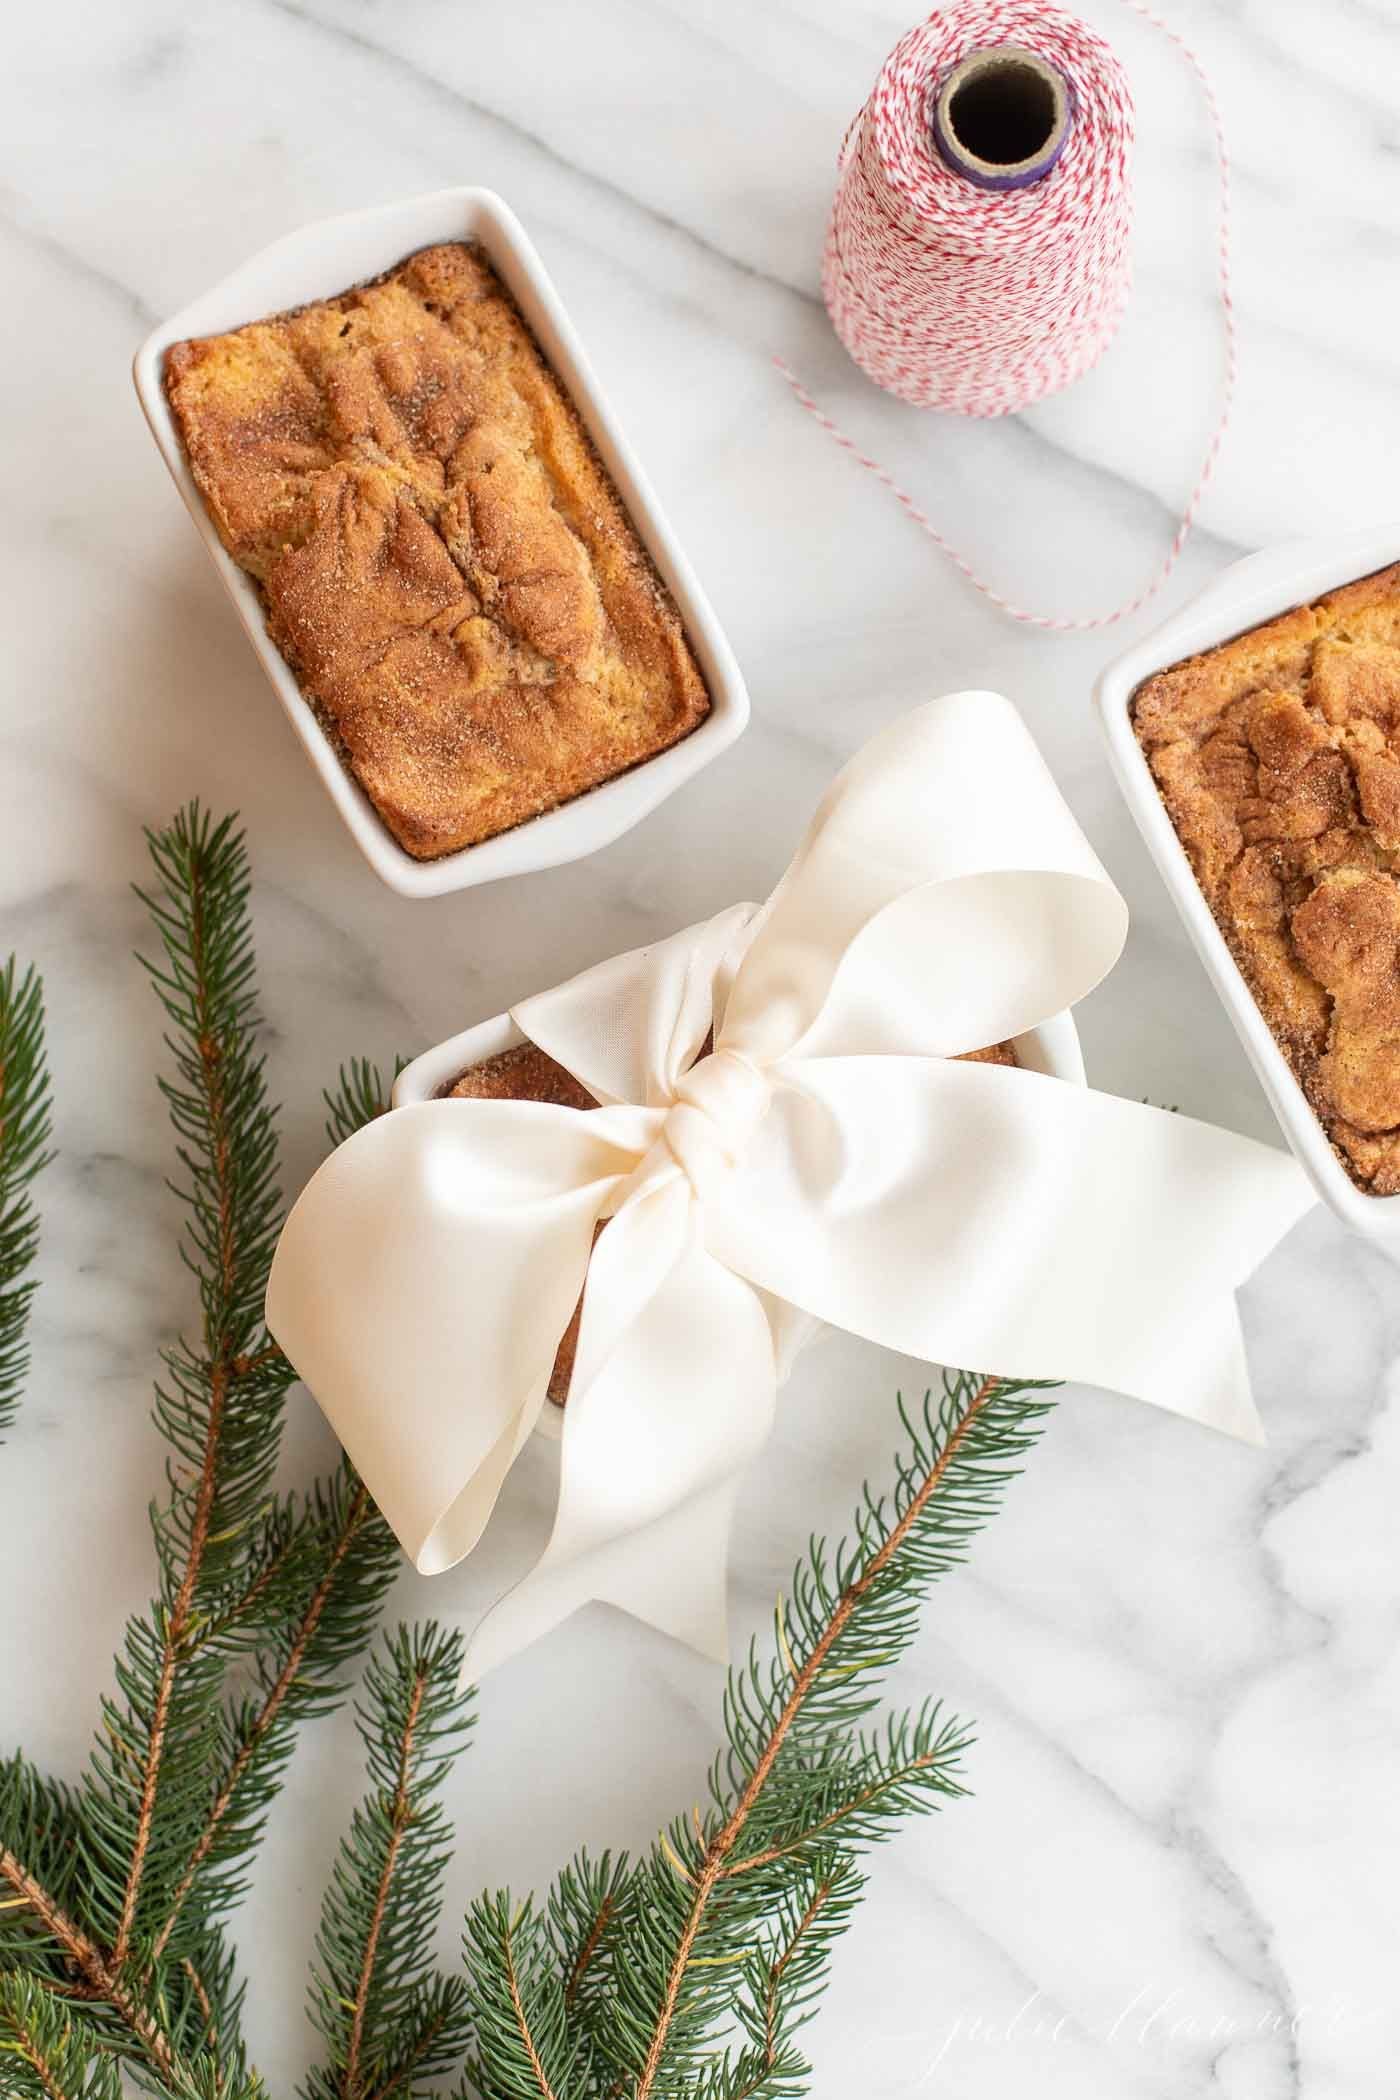 Loaves of cinnamon bread on a marble countertop, with gift wrapping materials nearby, indicating a holiday scene. 